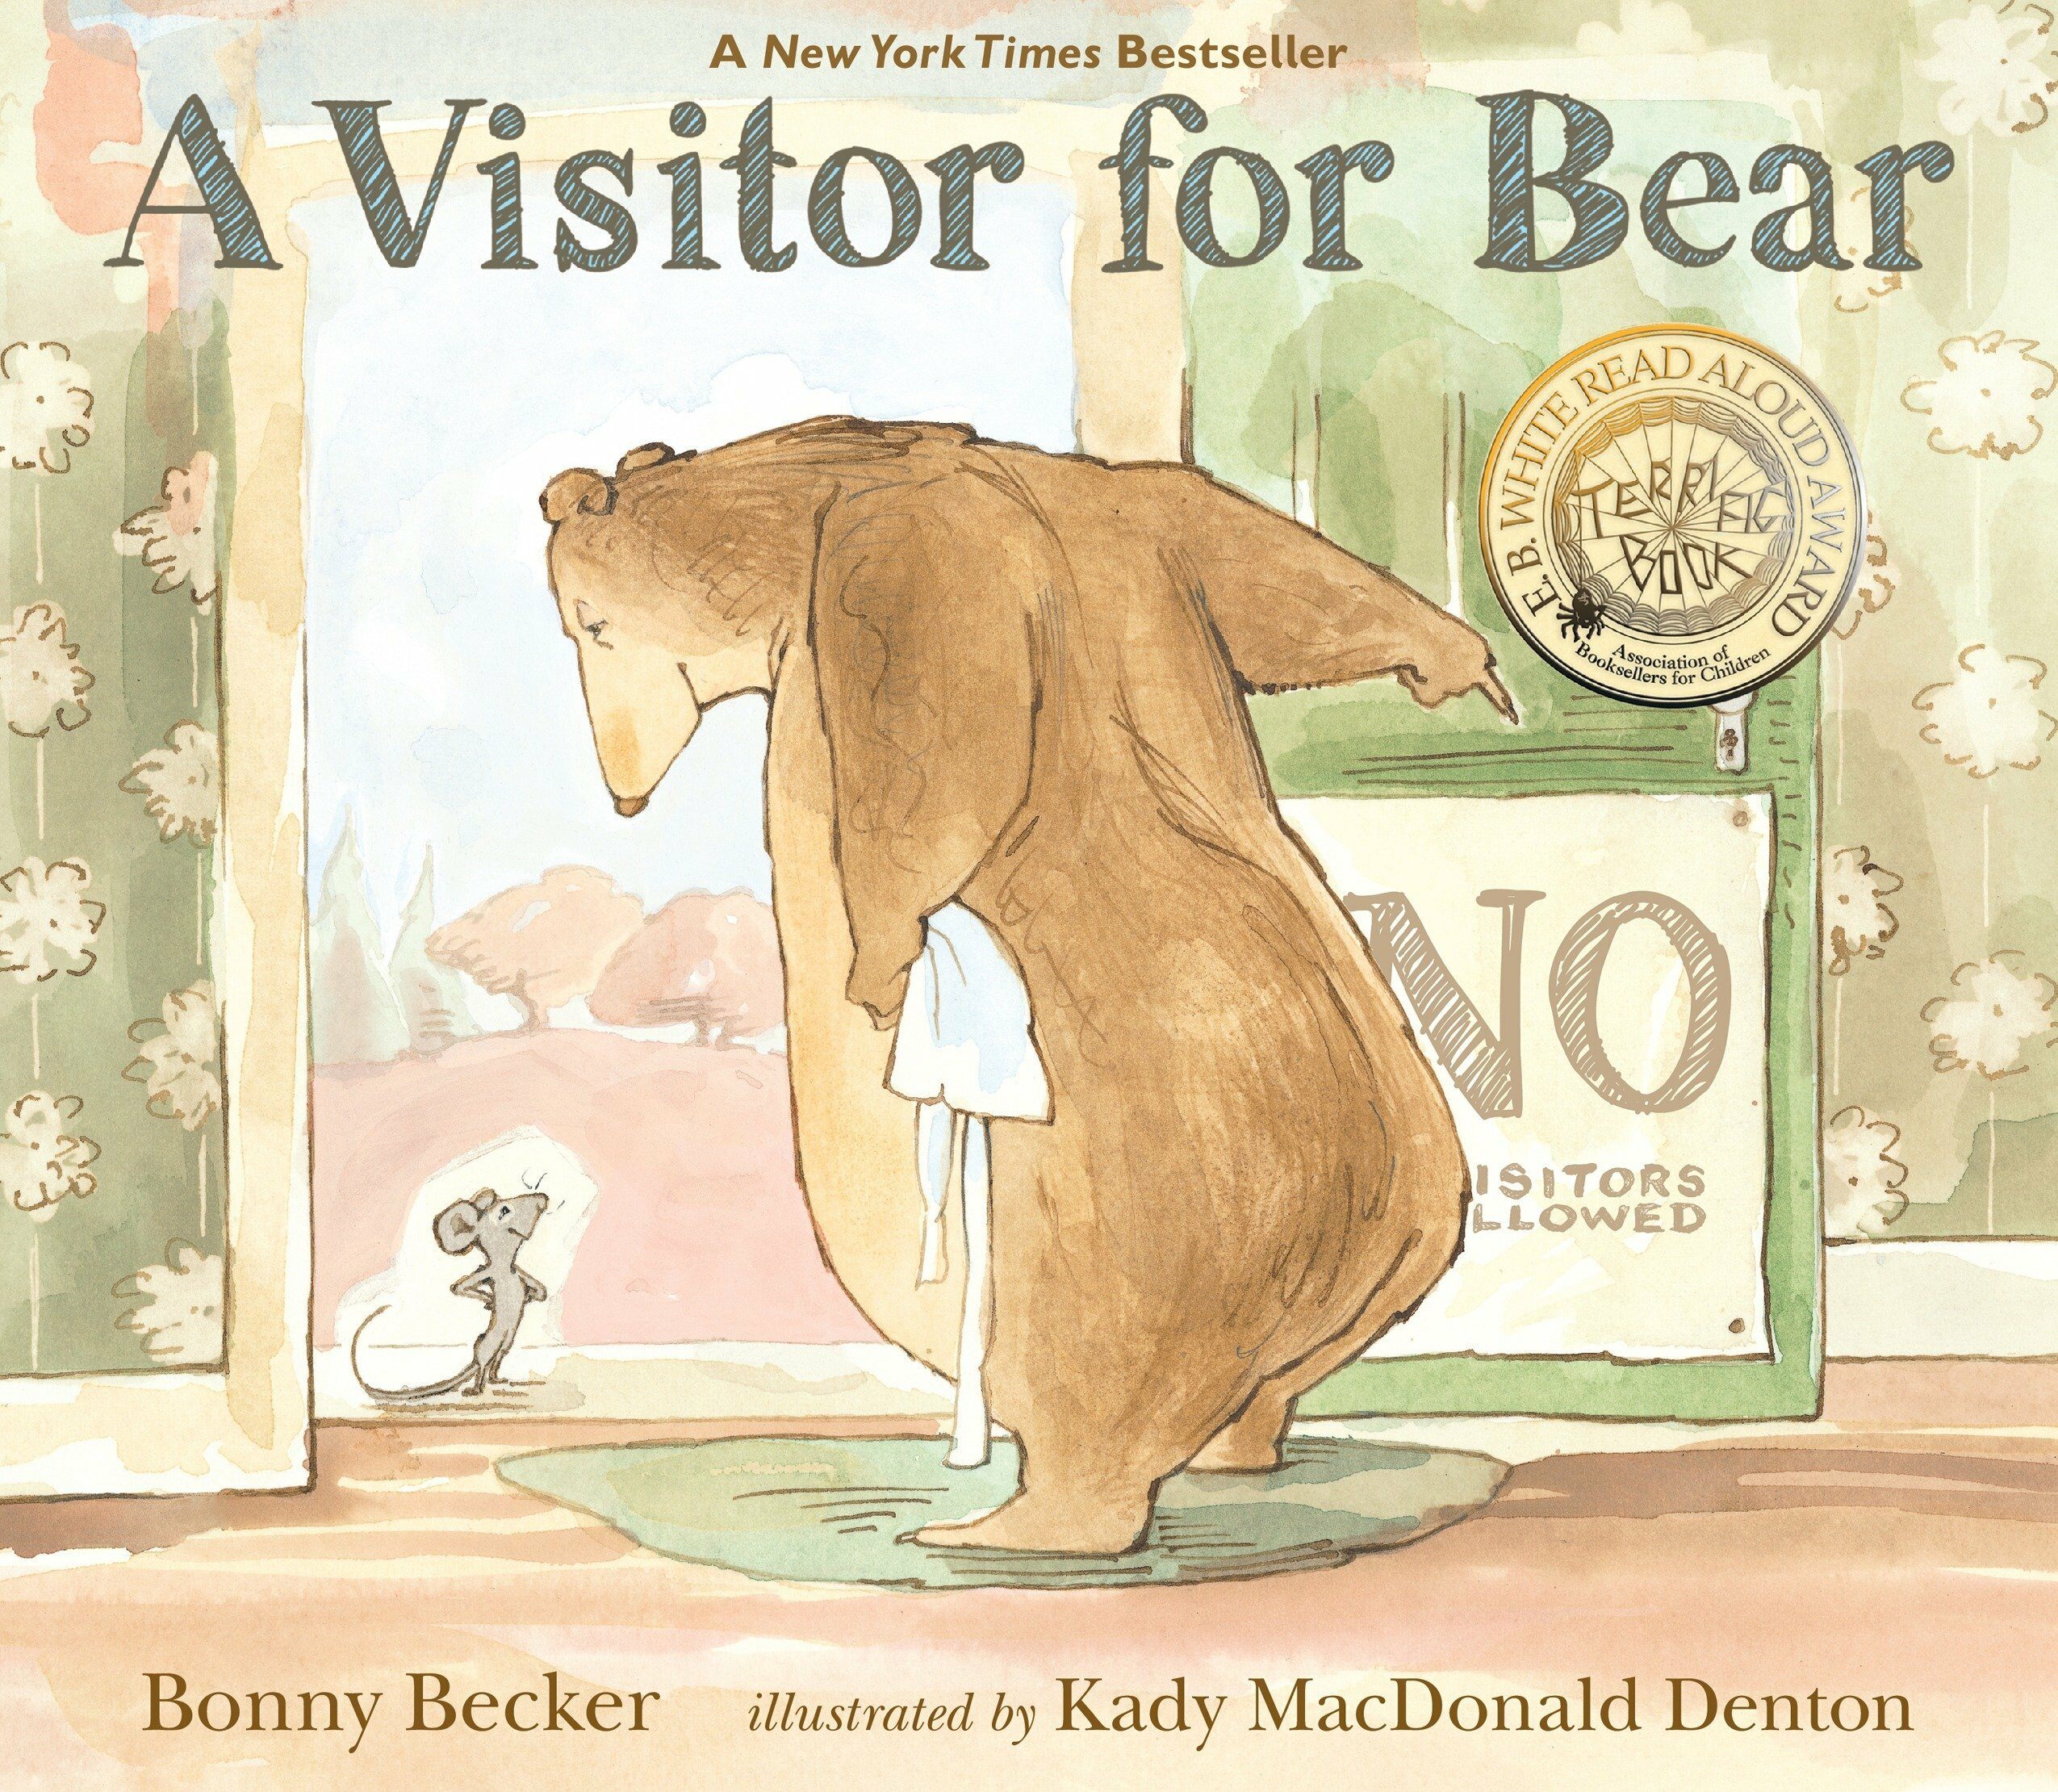 (A)Visitor for bear